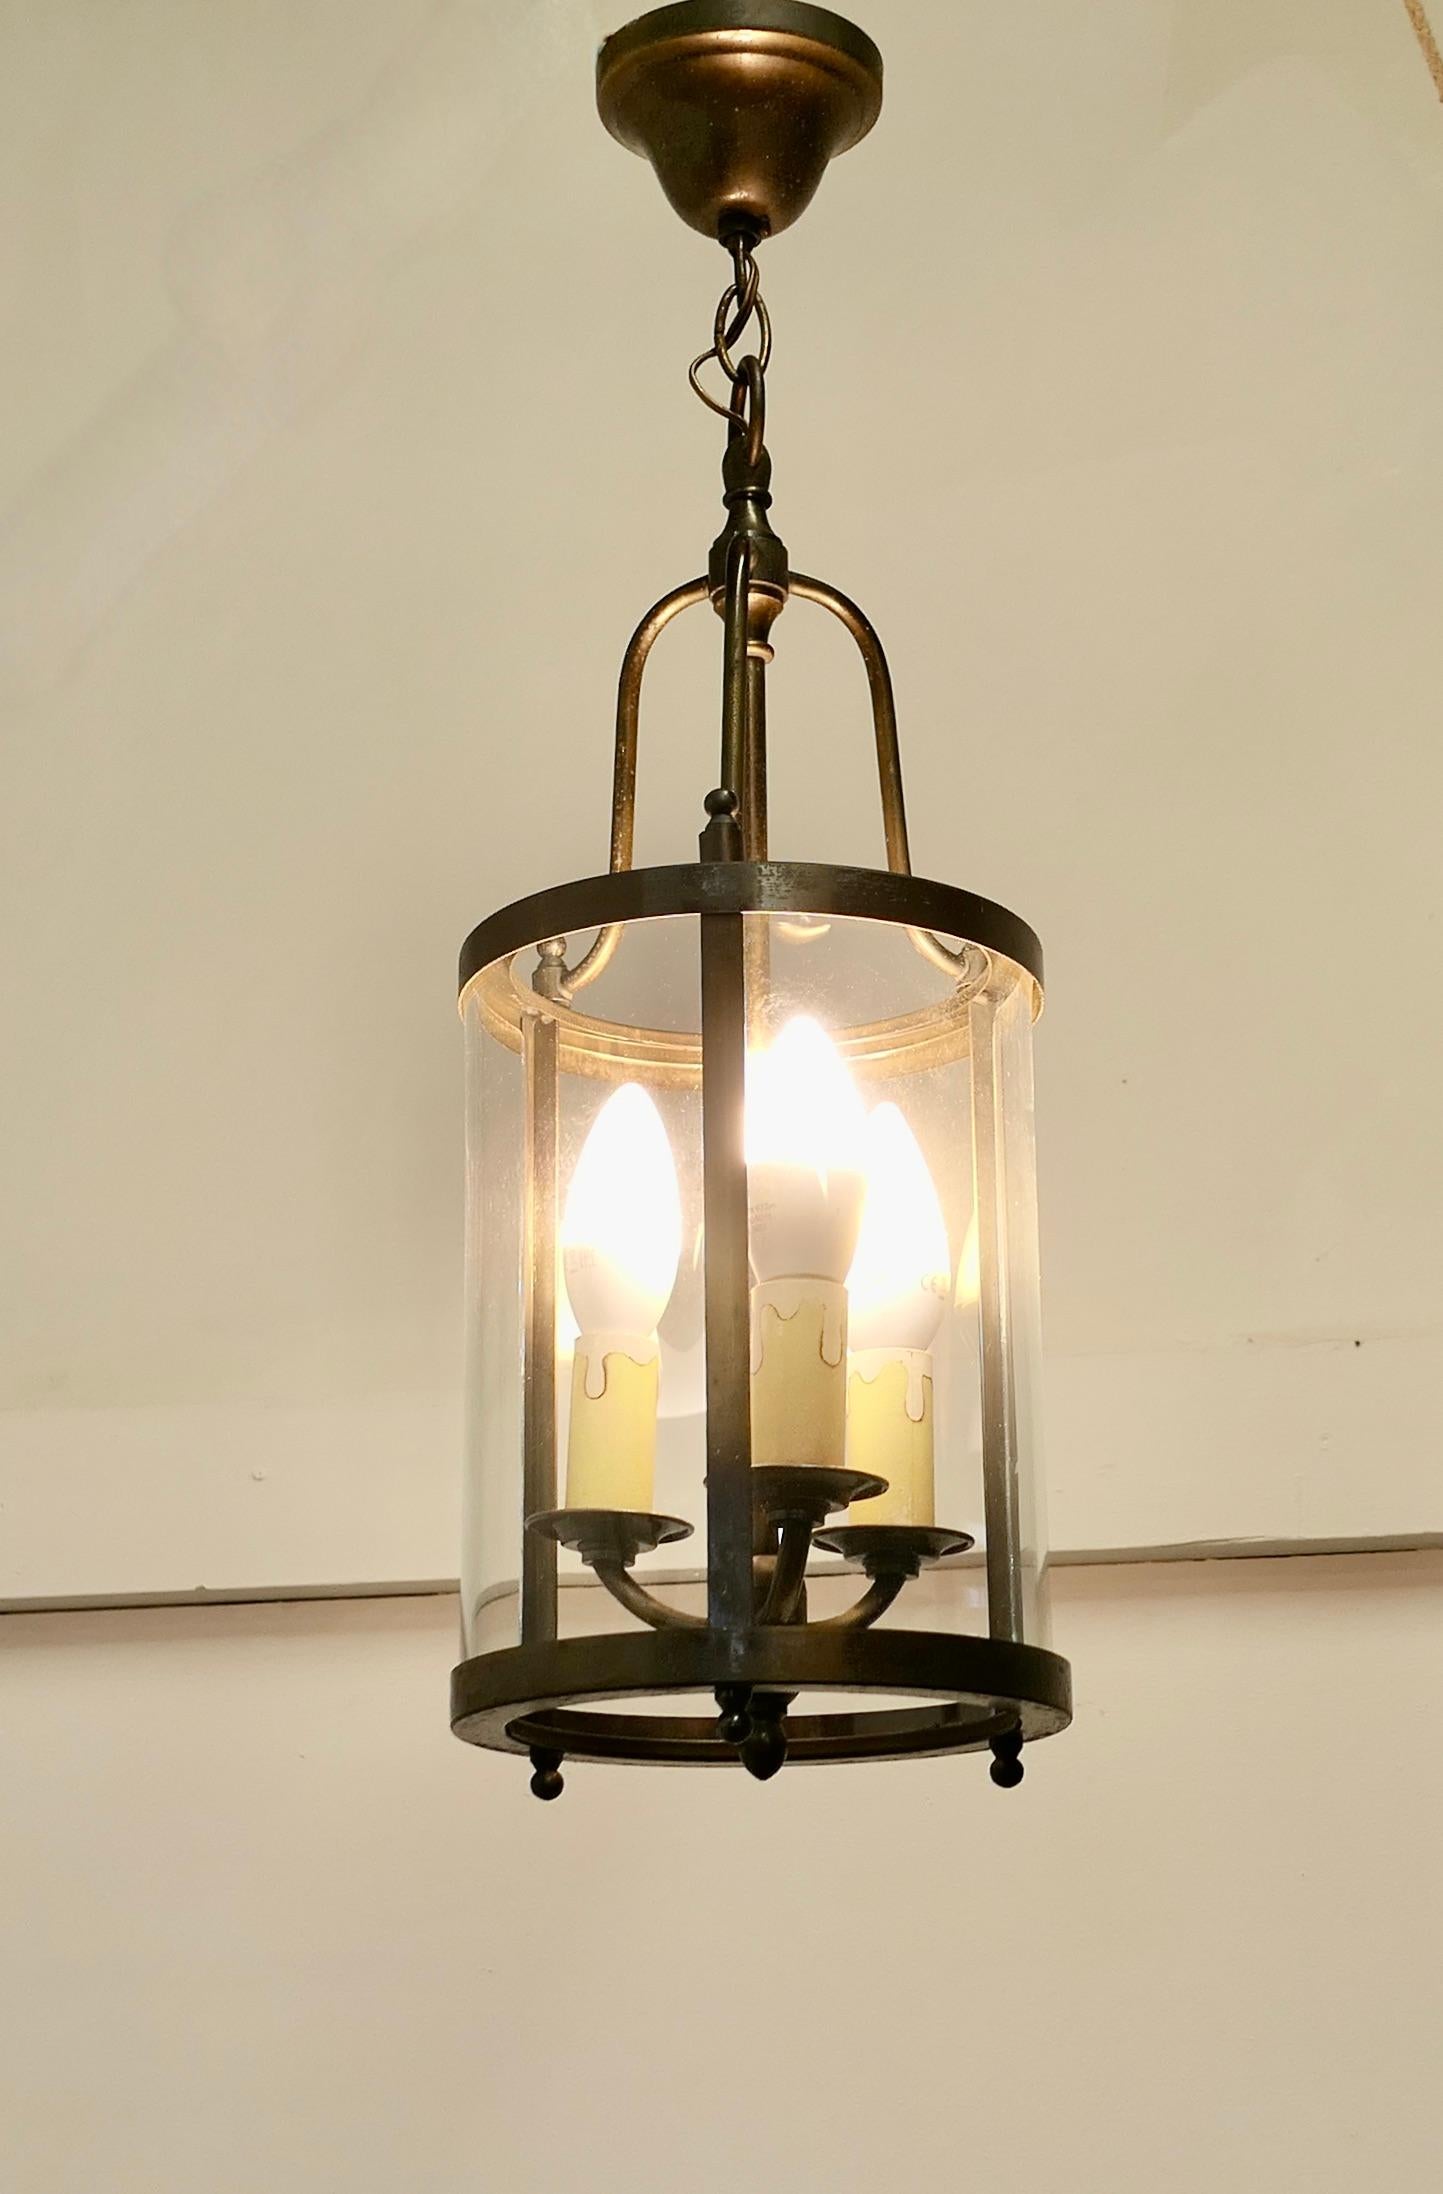 French Art DecoBrass and Glass Lantern Hall Light

A traditional lantern, the light has a cylindrical glass shade, and a triple light fitting to the interior it hangs on a short chain from a brass ceiling rose
The lantern gives a sensational bright